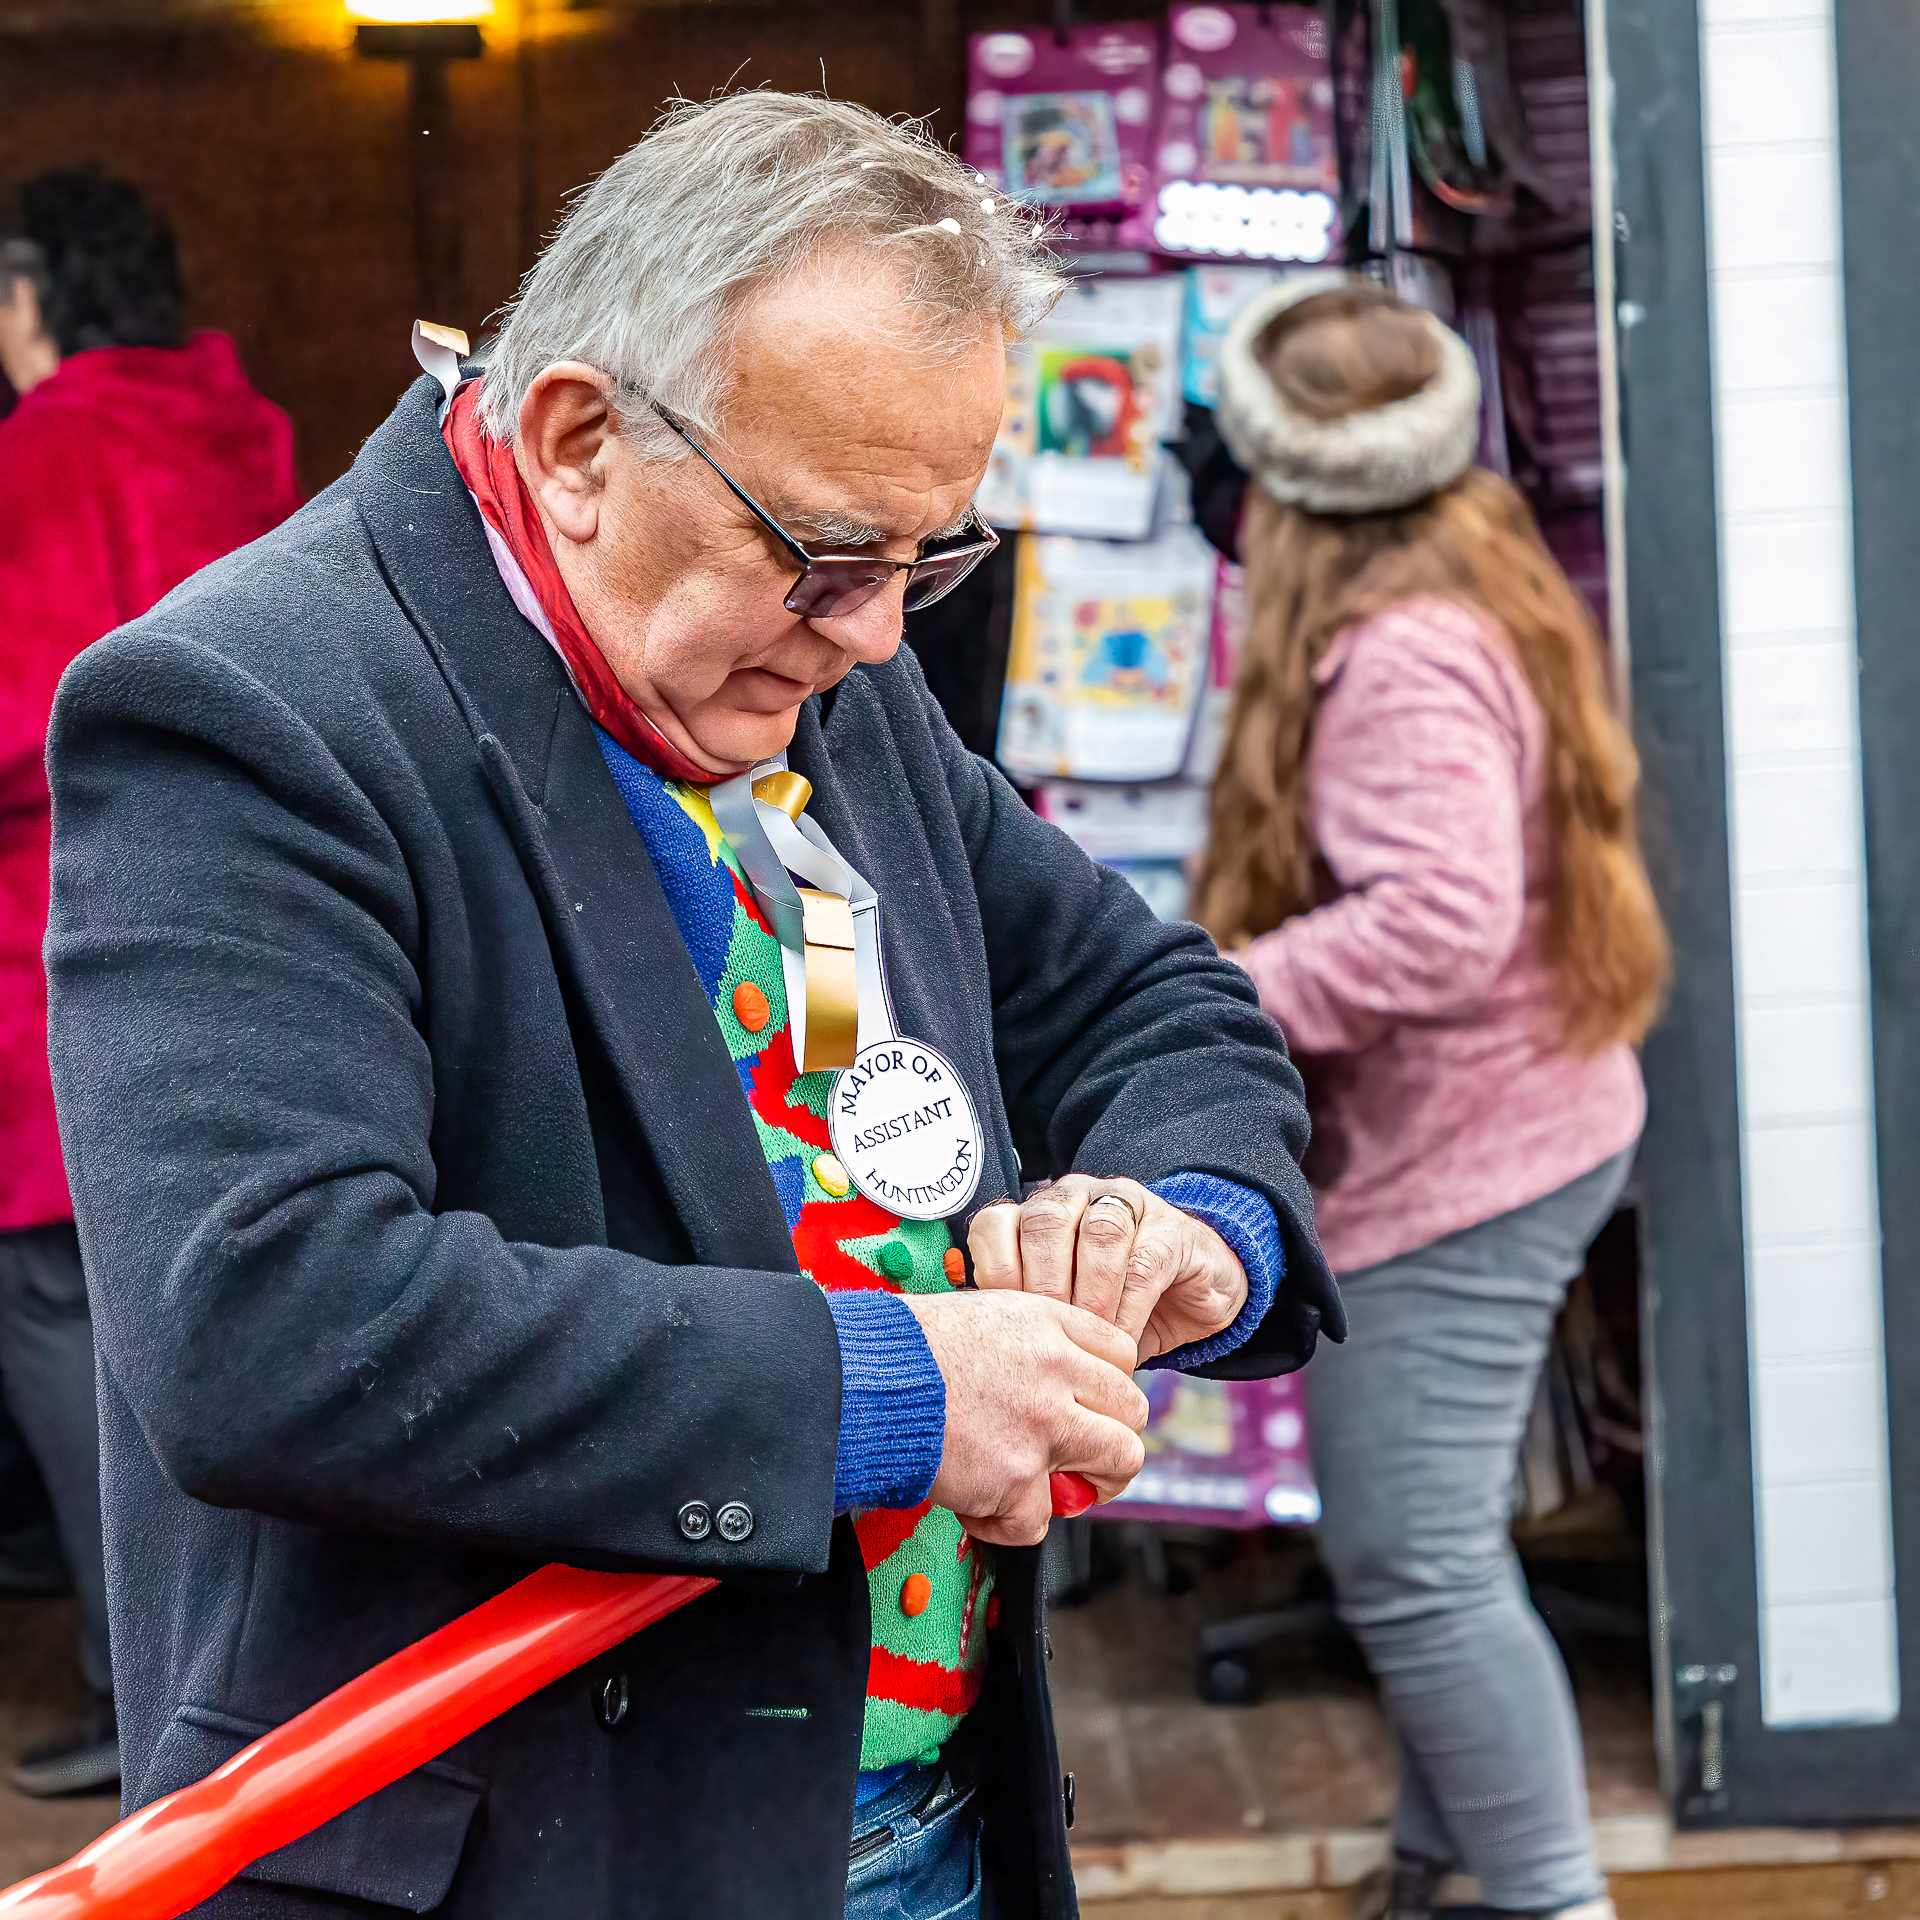 Dave the Balloon man wearing a smart jackets and a bright colour Christmas jumper tying off a long red balloon.